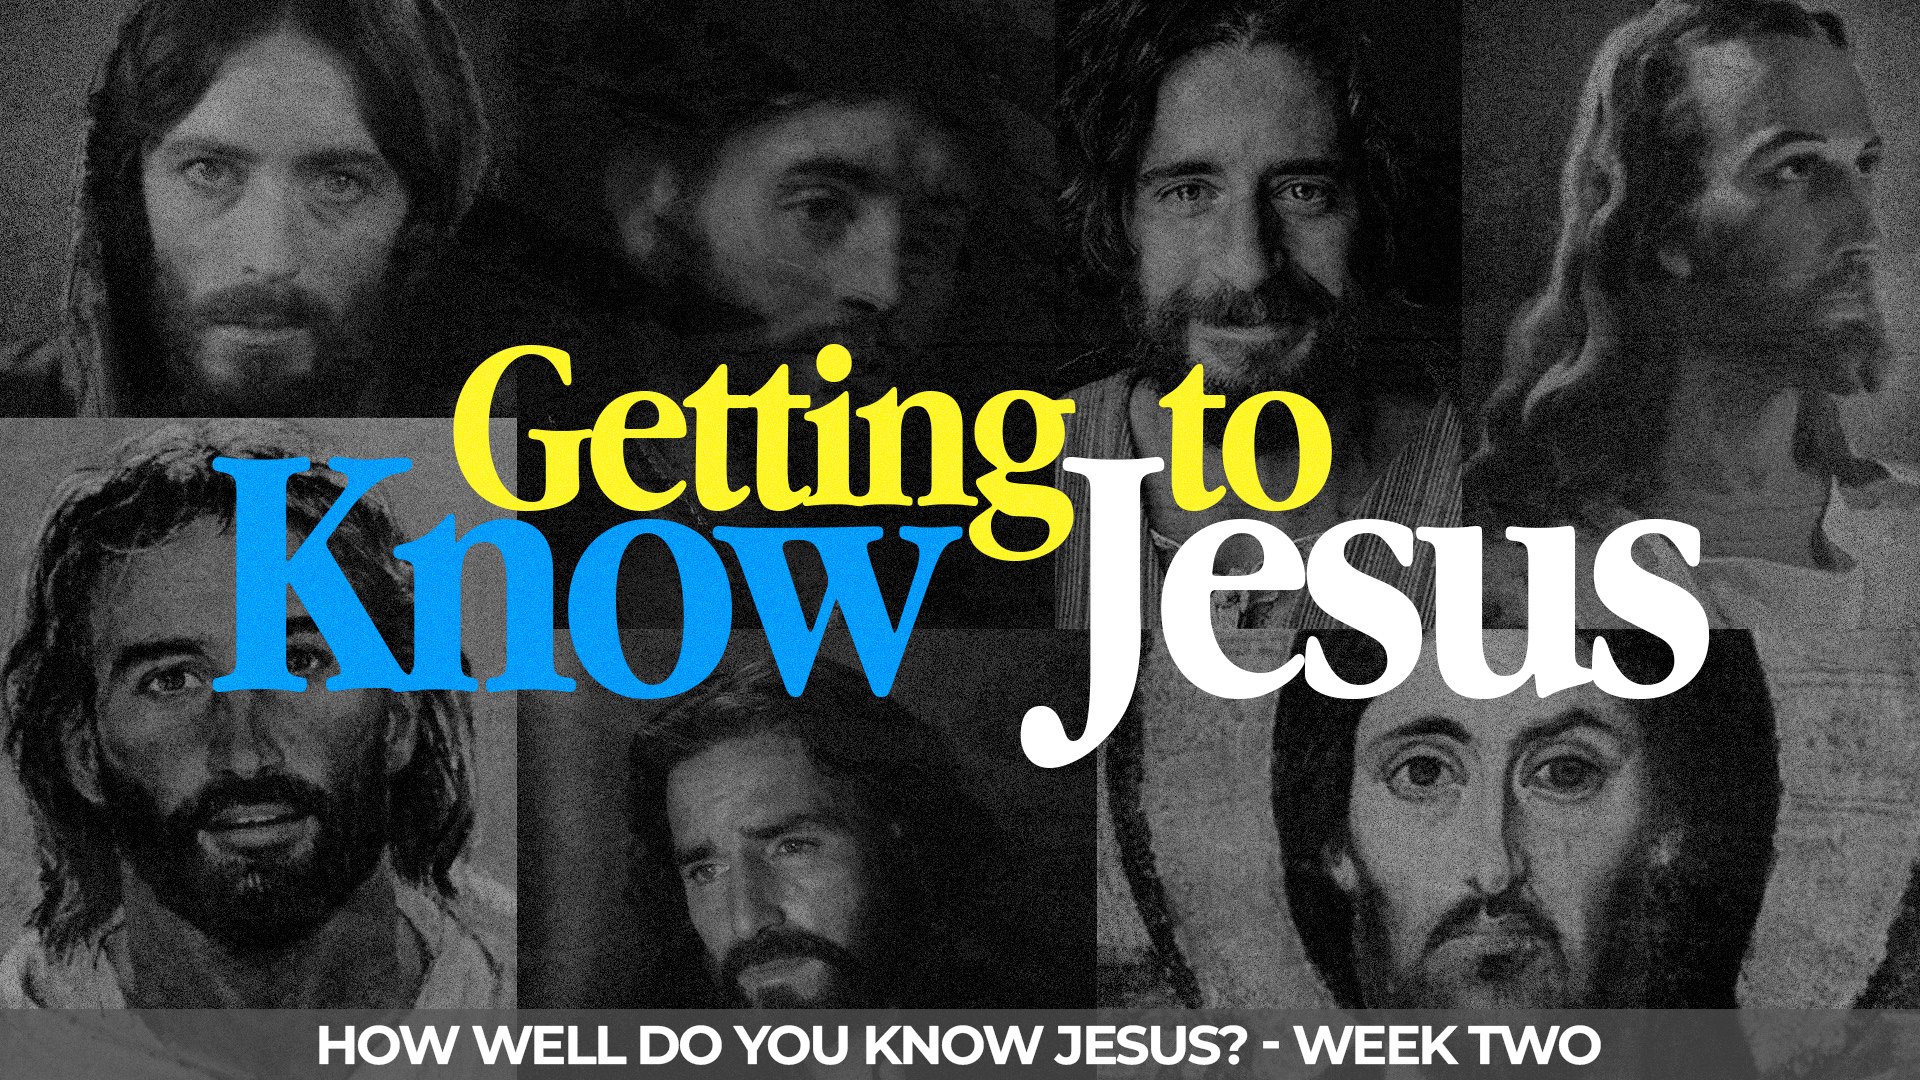 How well do you know Jesus? - Week Two